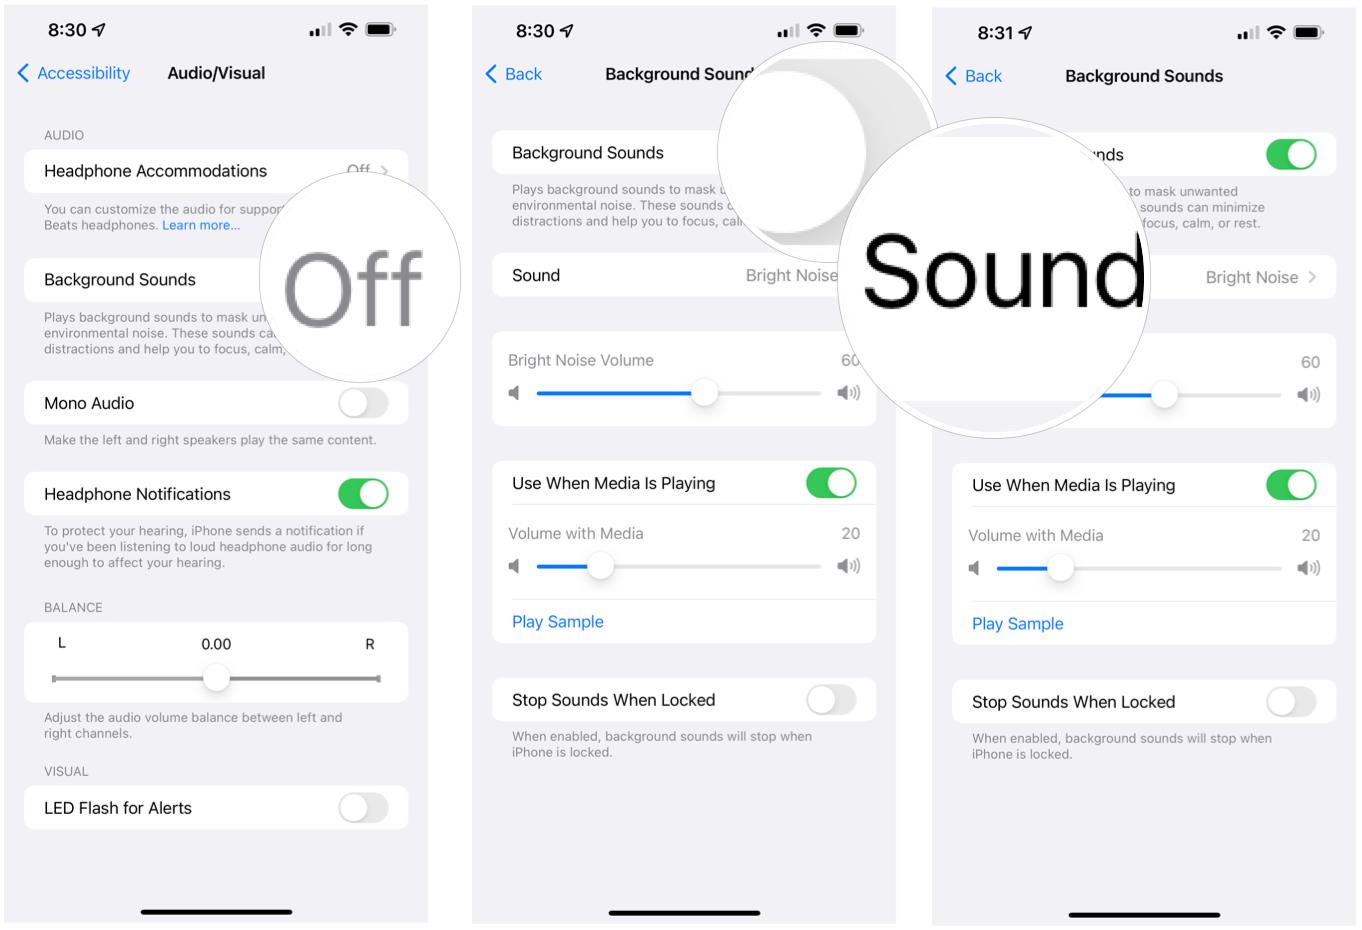 To set up Background Sounds, tap Background Sounds, then toggle Background Sounds. Choose Sound.